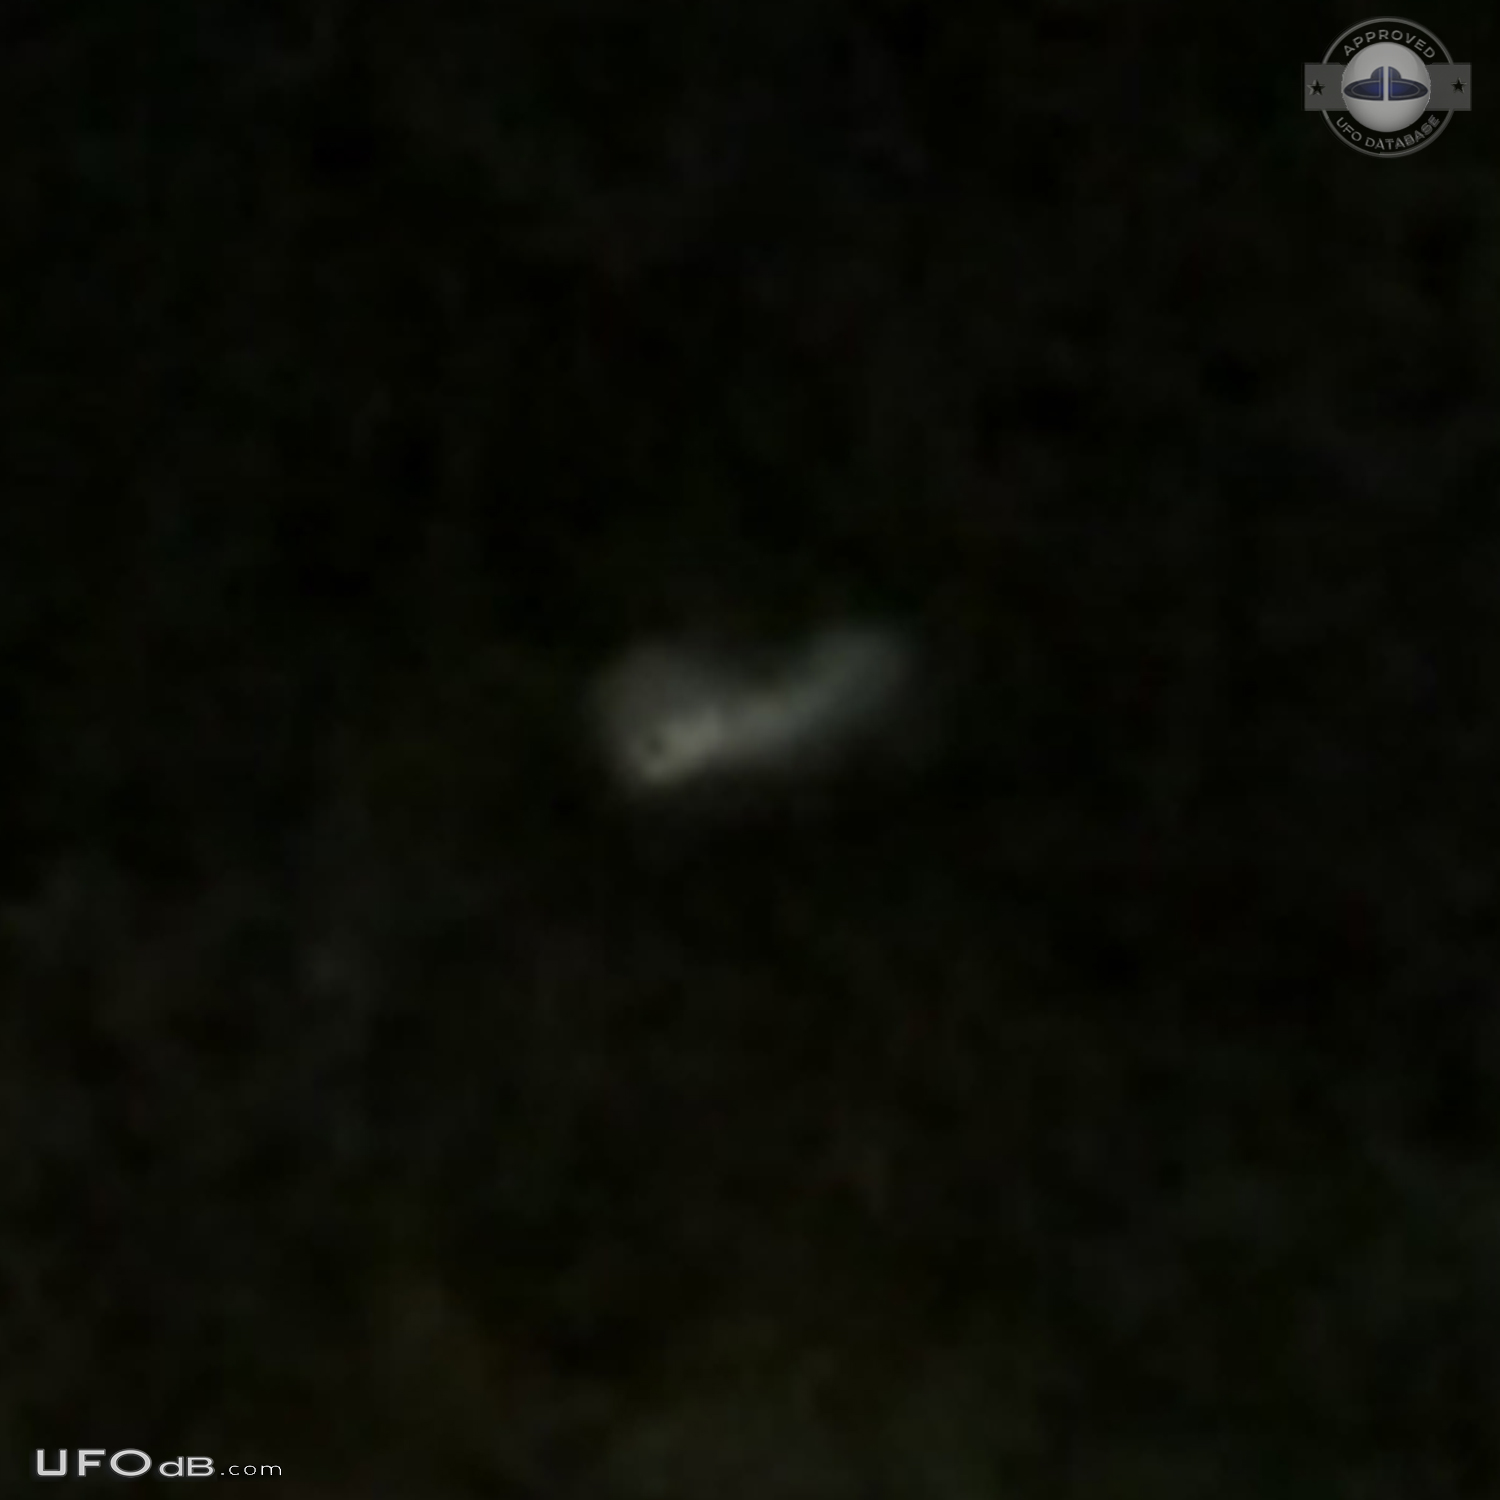 Looked like mothership with smaller glowing craft flying around it in  UFO Picture #708-4